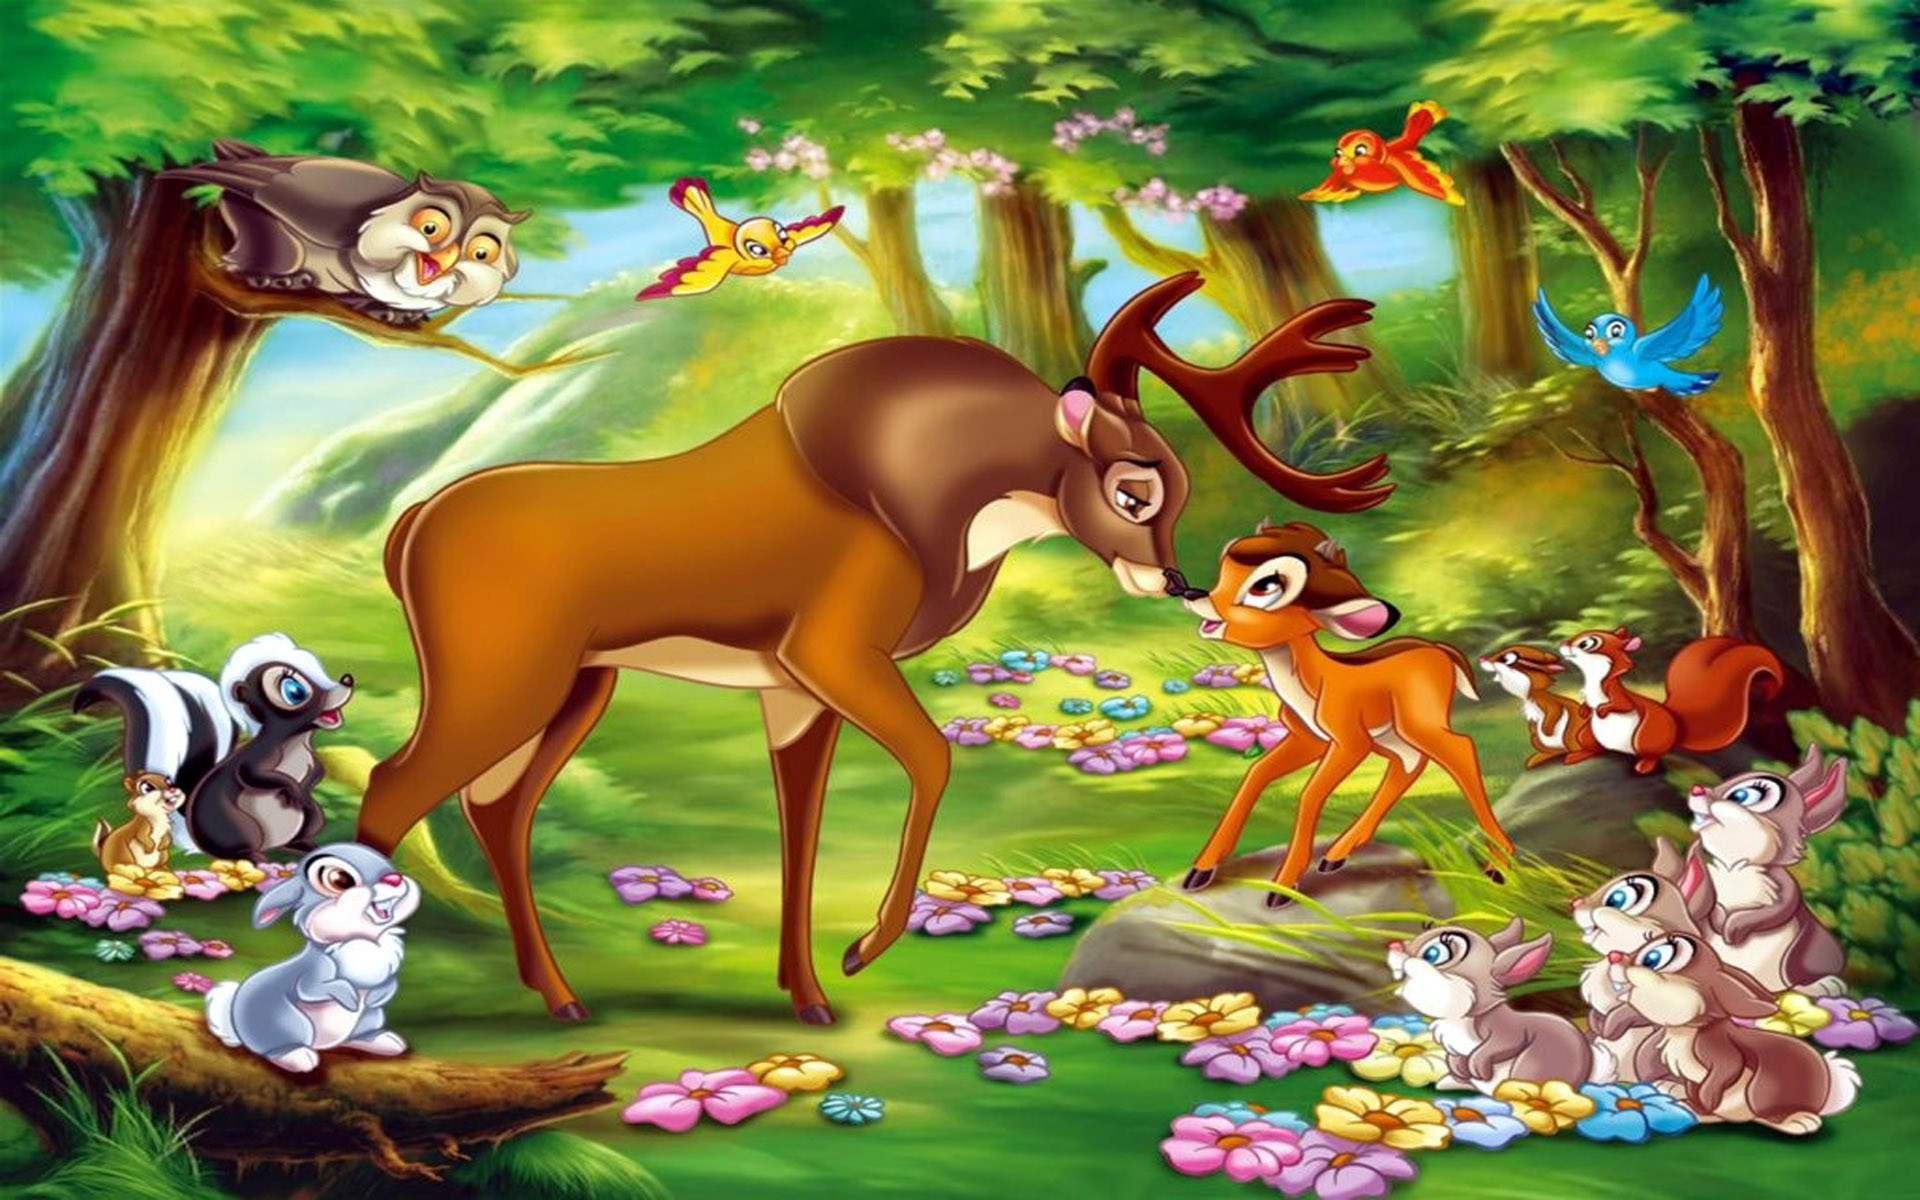 Deer Bambi And Great Prin - Bambi And The Great Prince - HD Wallpaper 